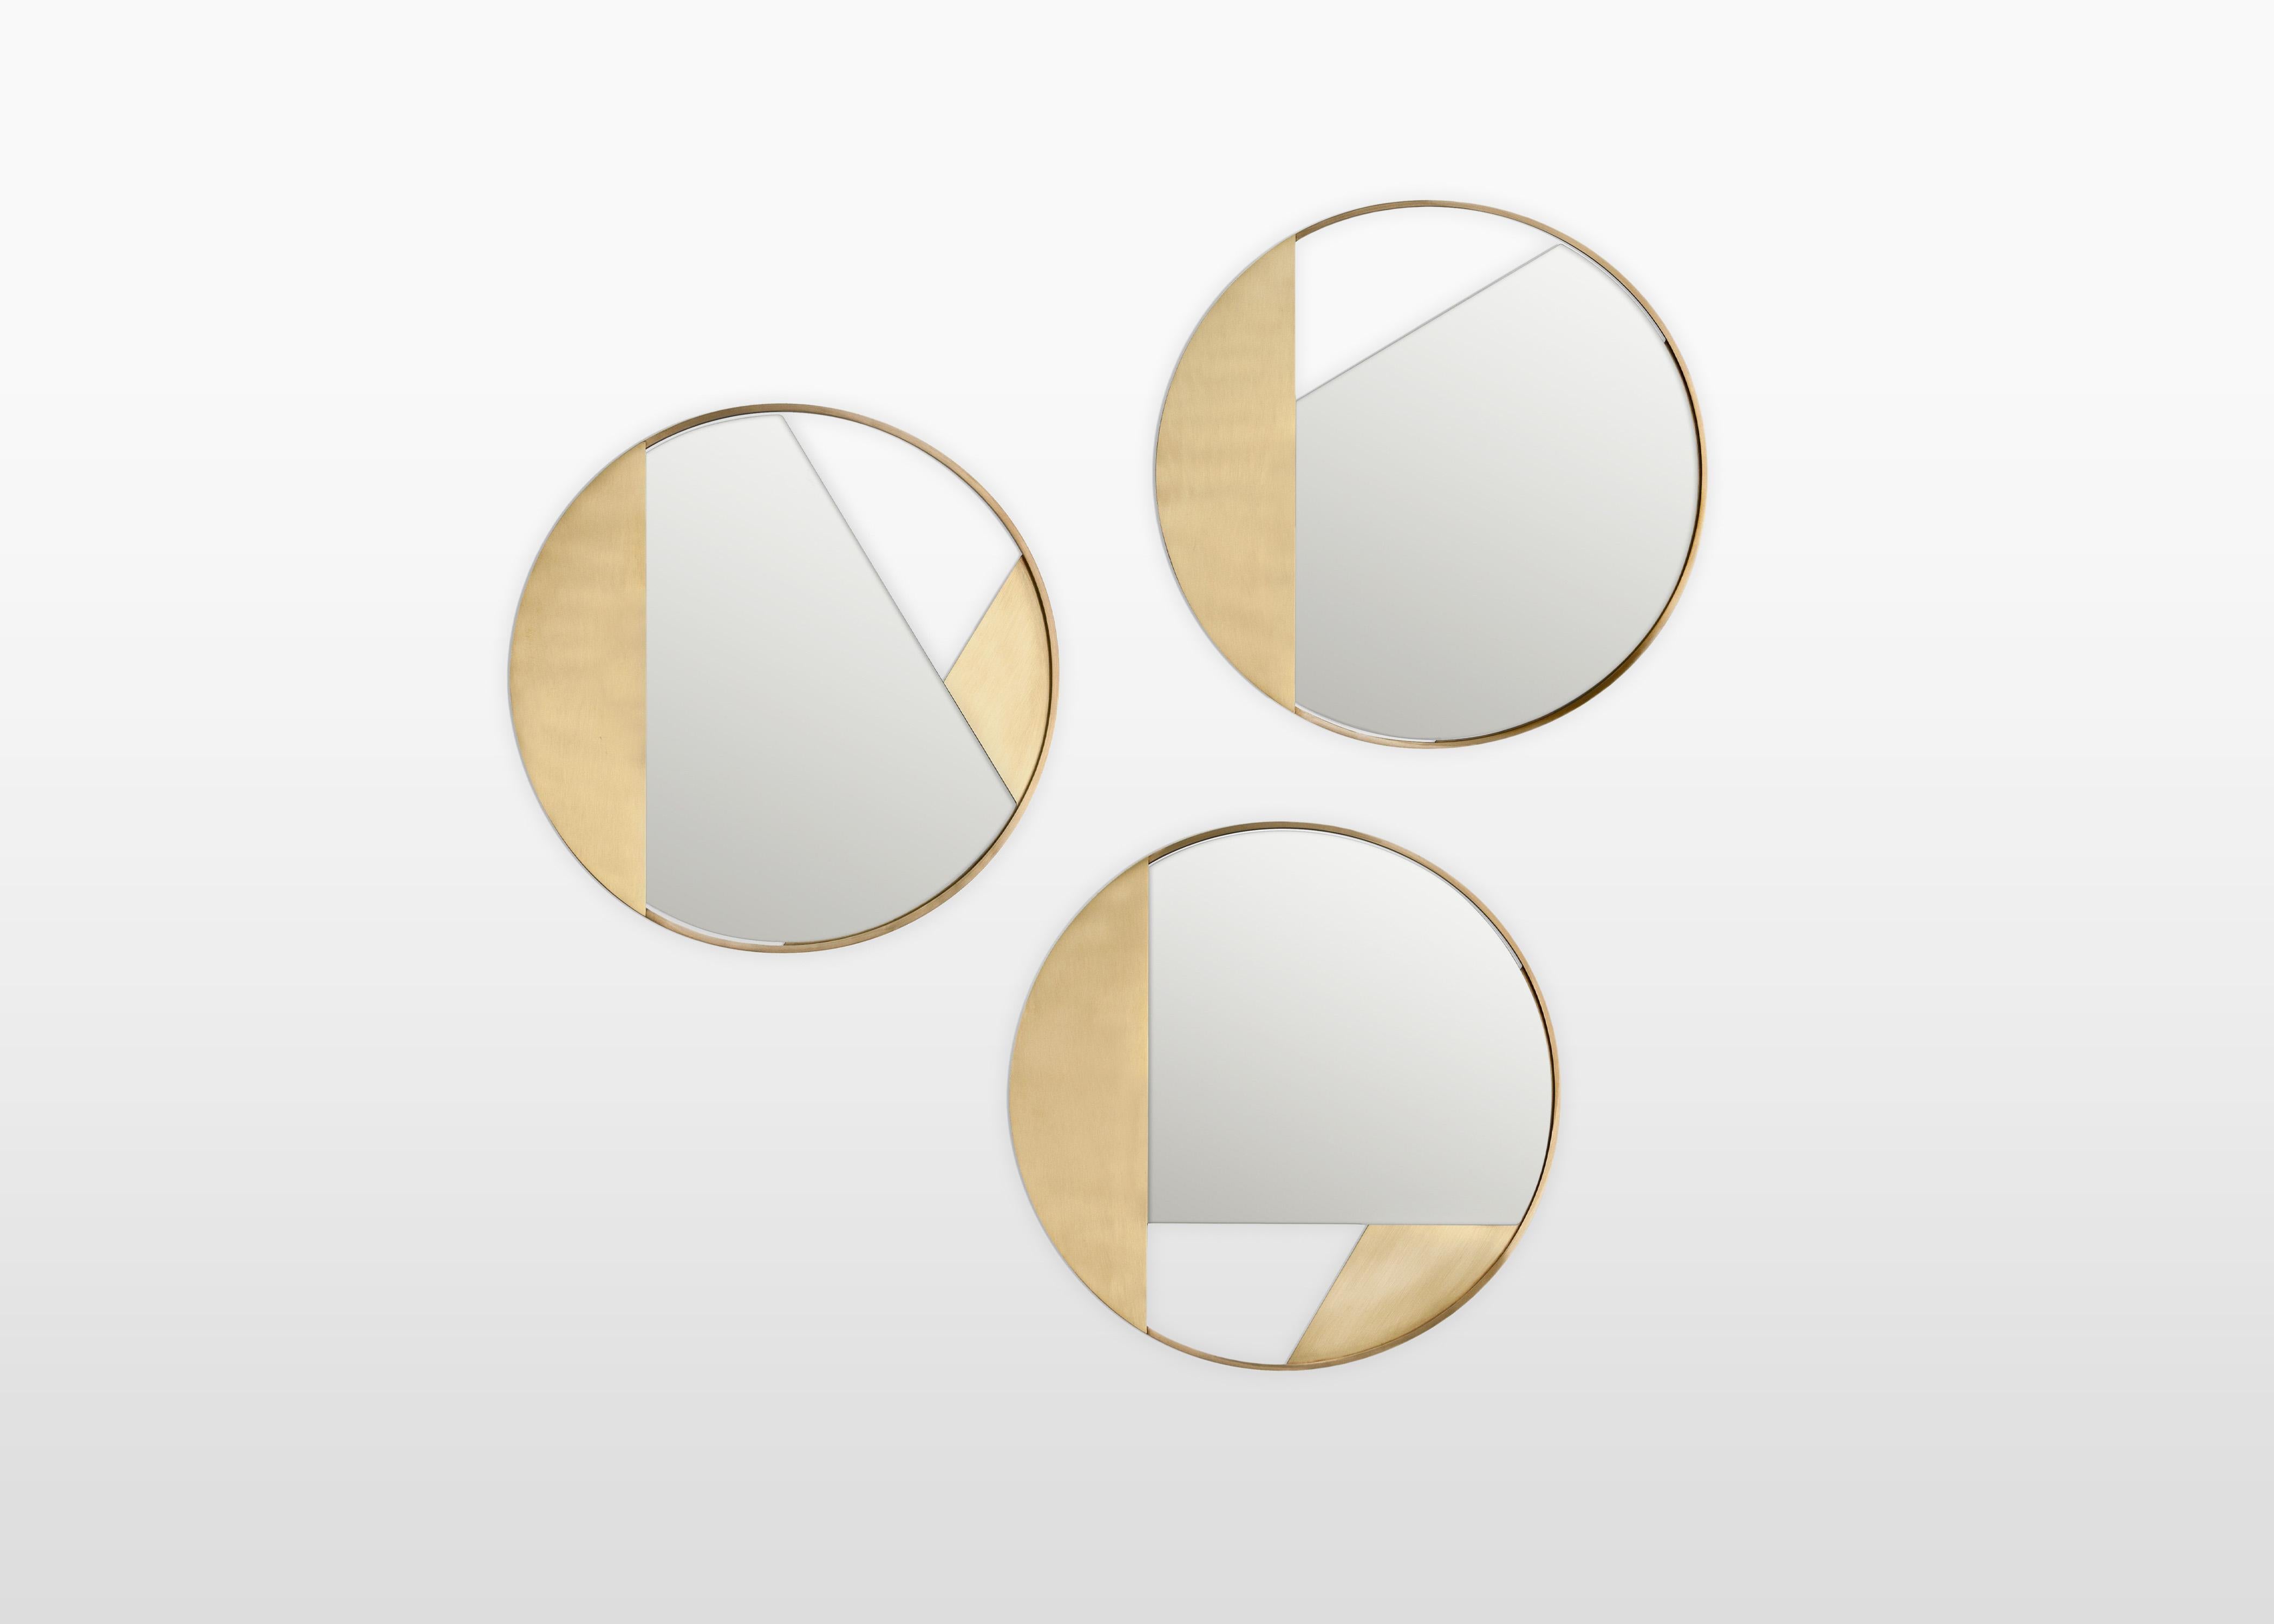 Set of 3 small brass edition mirror by Edizione Limitata
Limited edition of 1000 pieces. Signed and numbered.
Designers: Simone Fanciullacci
Dimensions: D 4 x Ø 55 cm (each).
Materials: Brushed brass and mirror

Edizione Limitata, that is to say